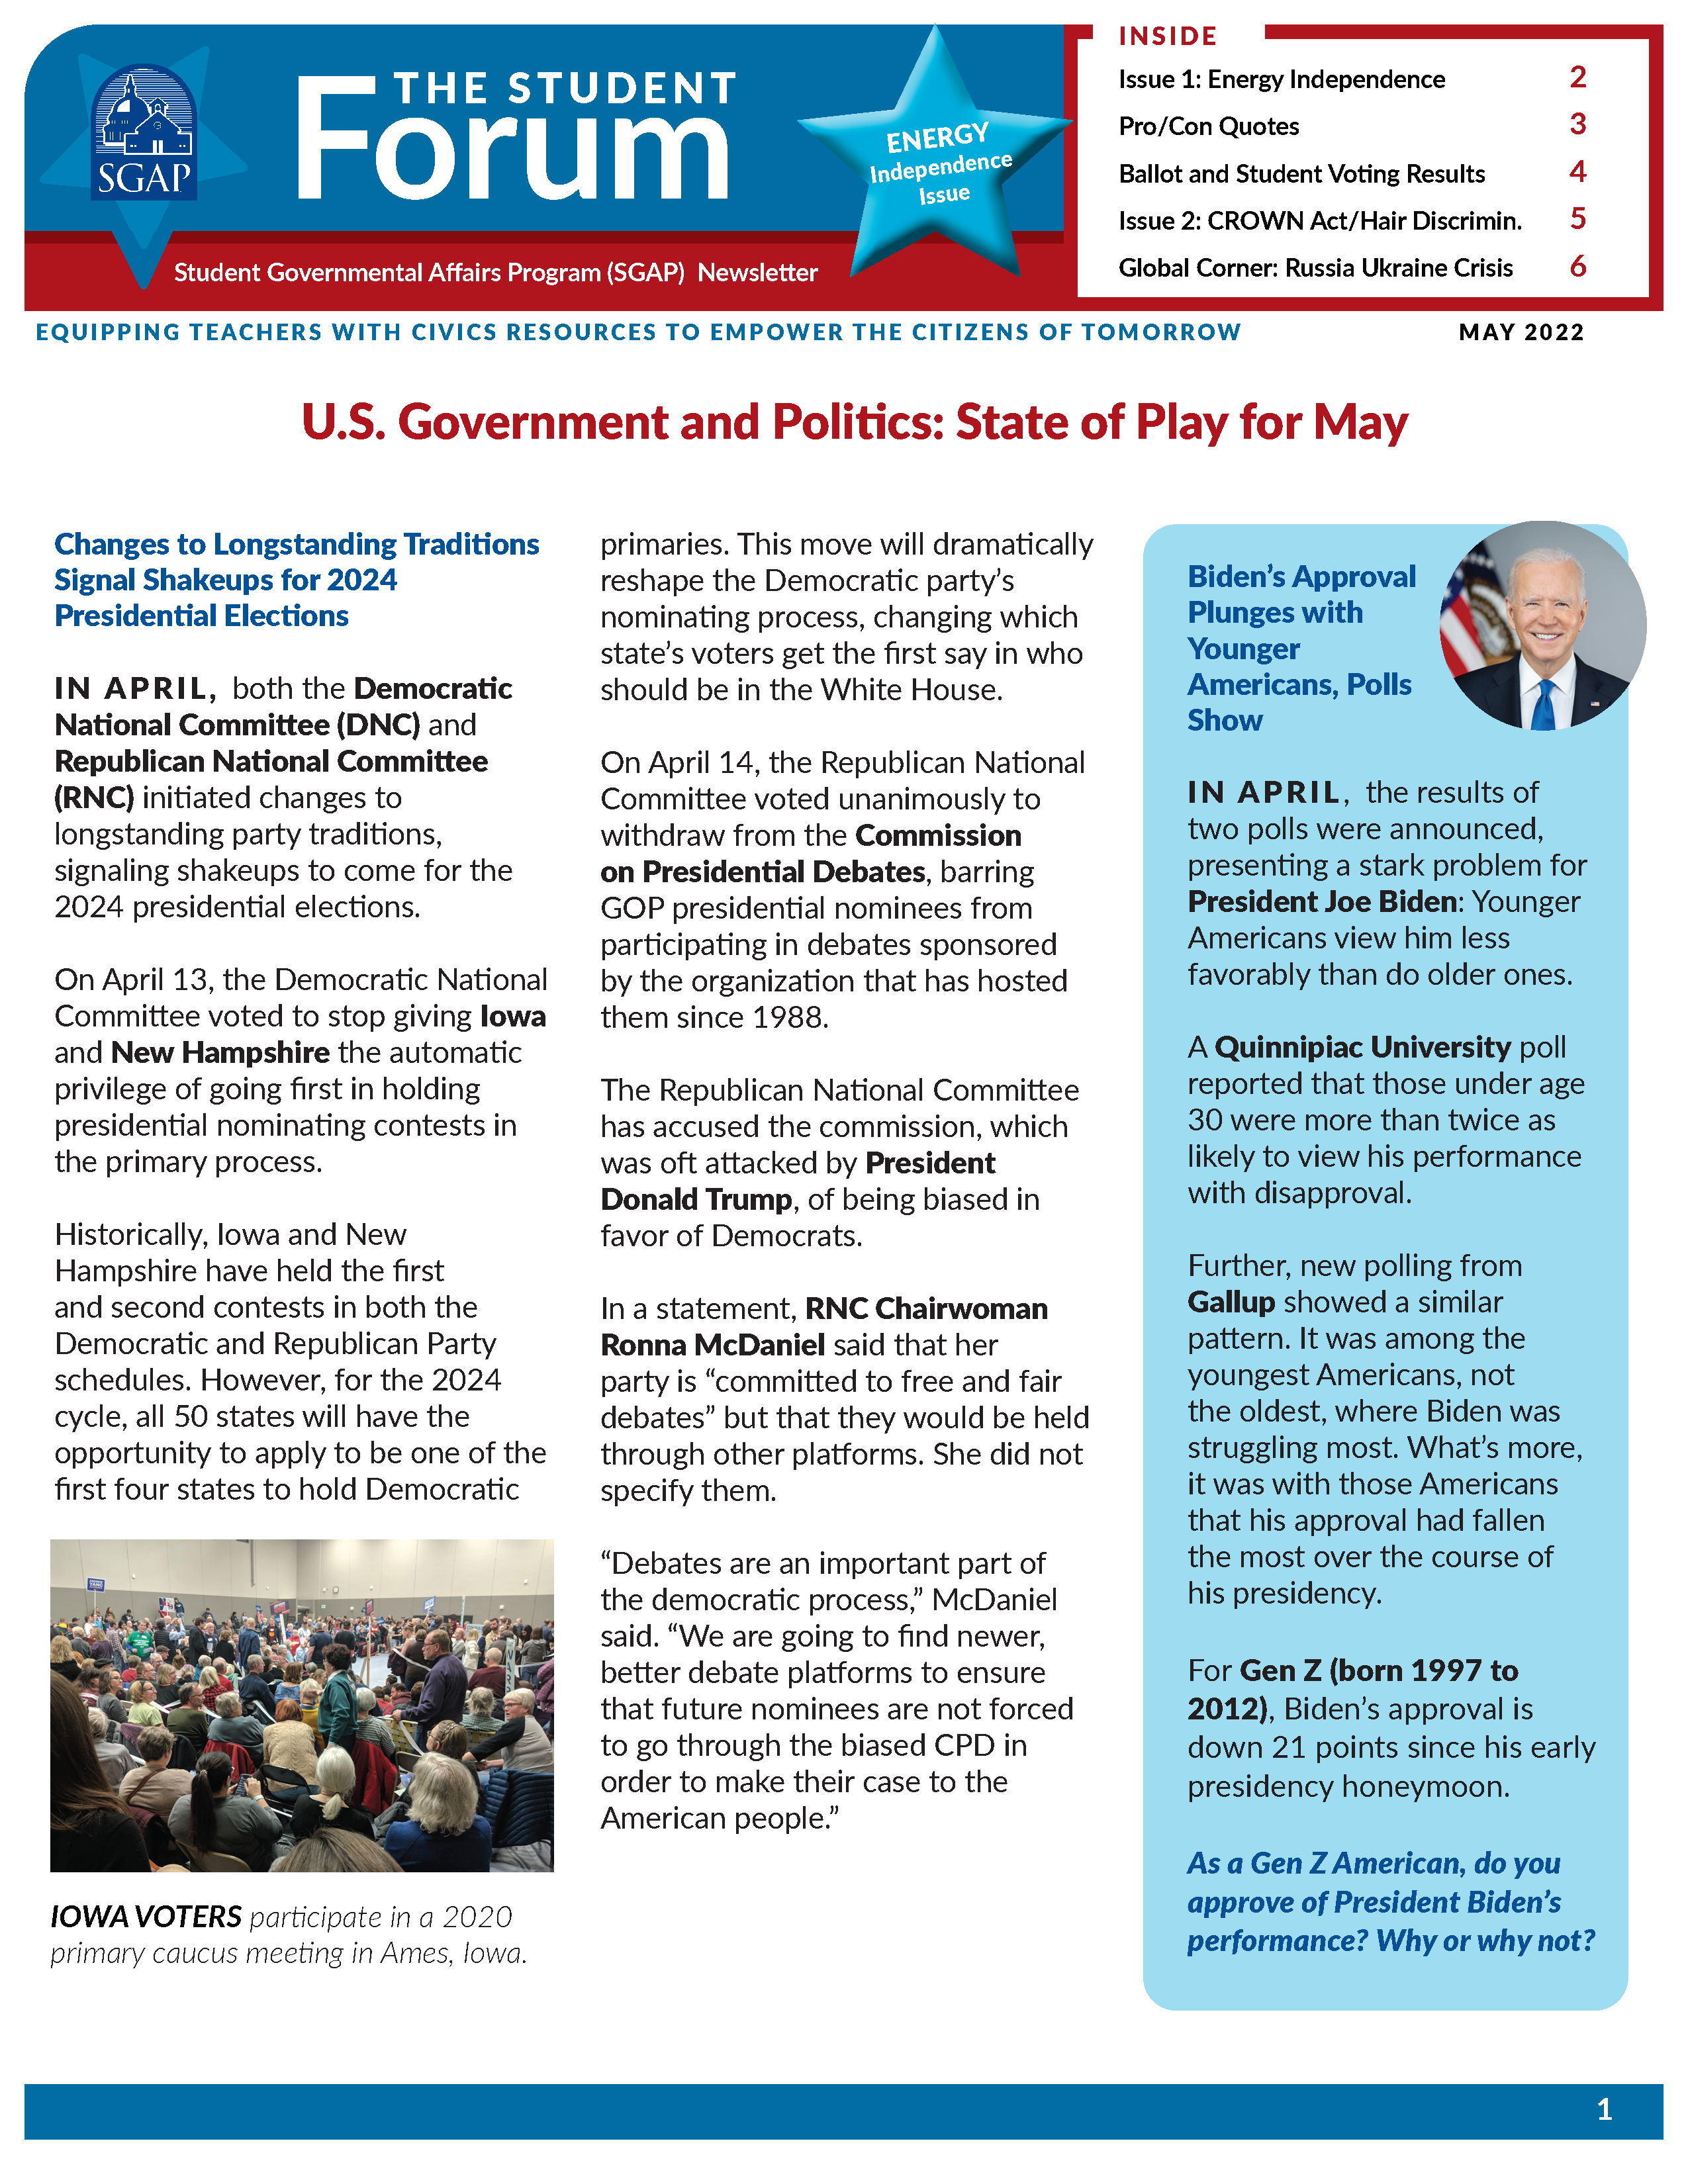 SGAP Newsletter for May 2022 (Energy Independence + CROWN Act)